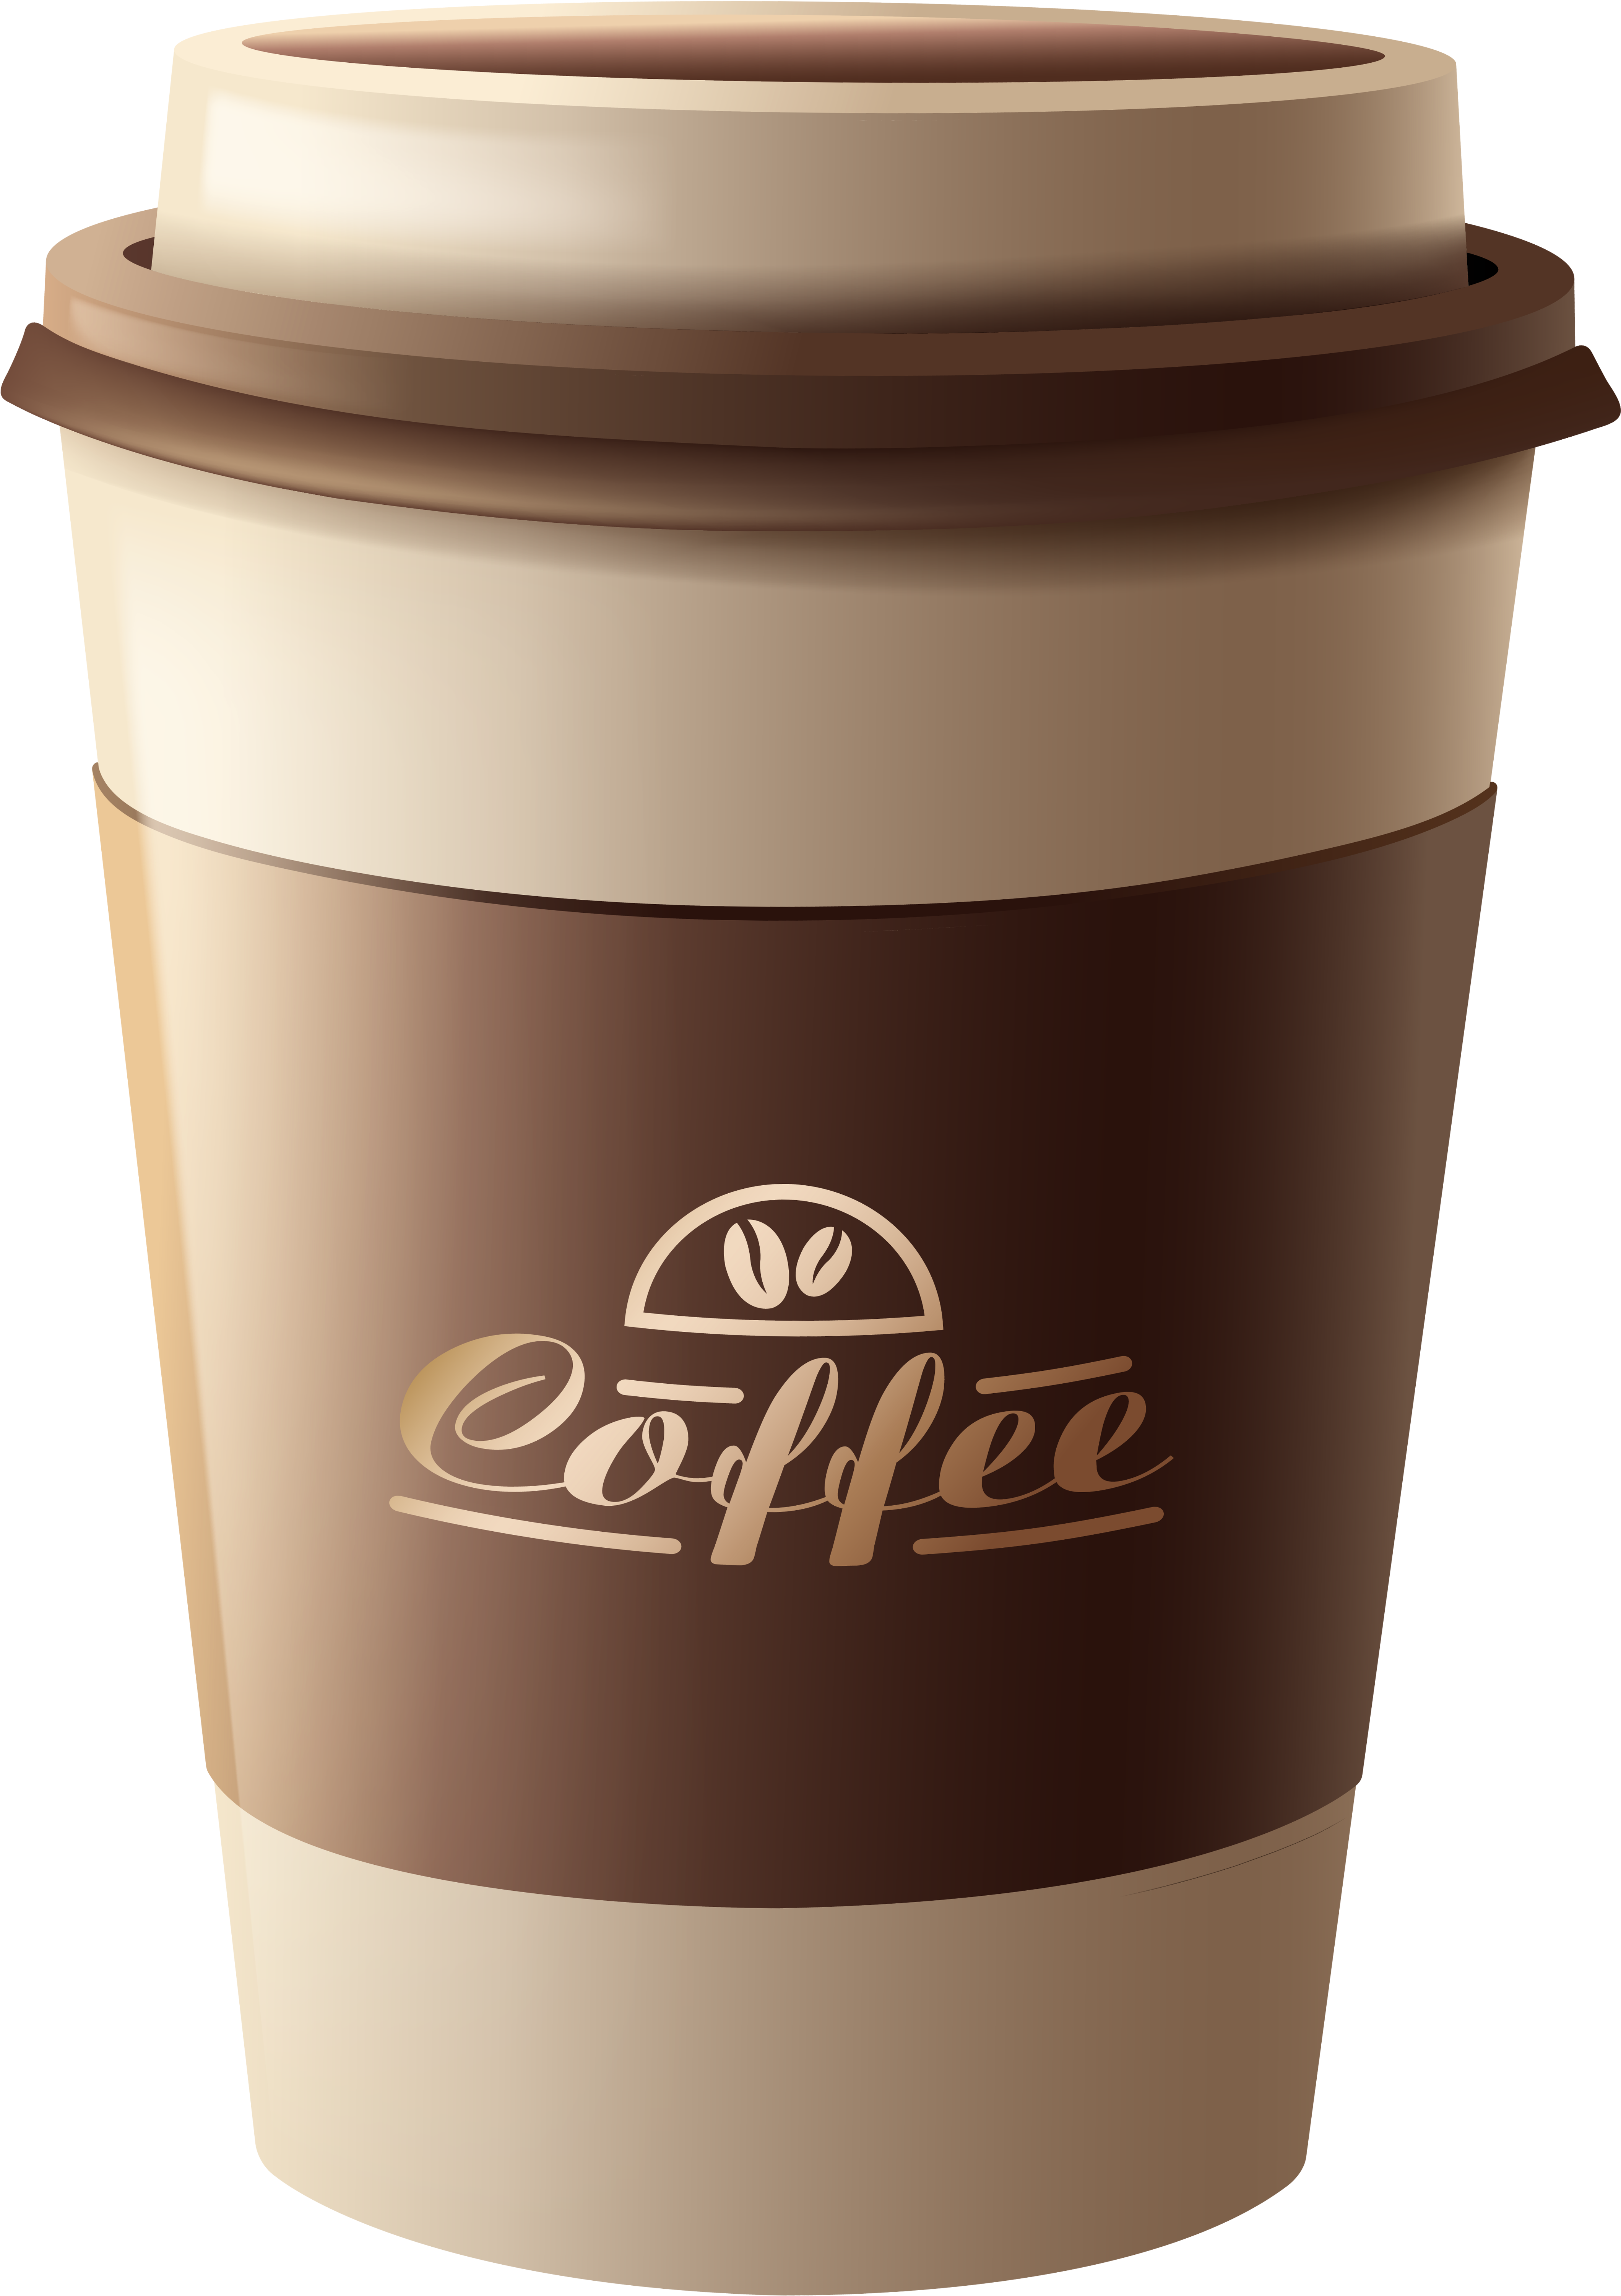 A Coffee Cup With A Lid